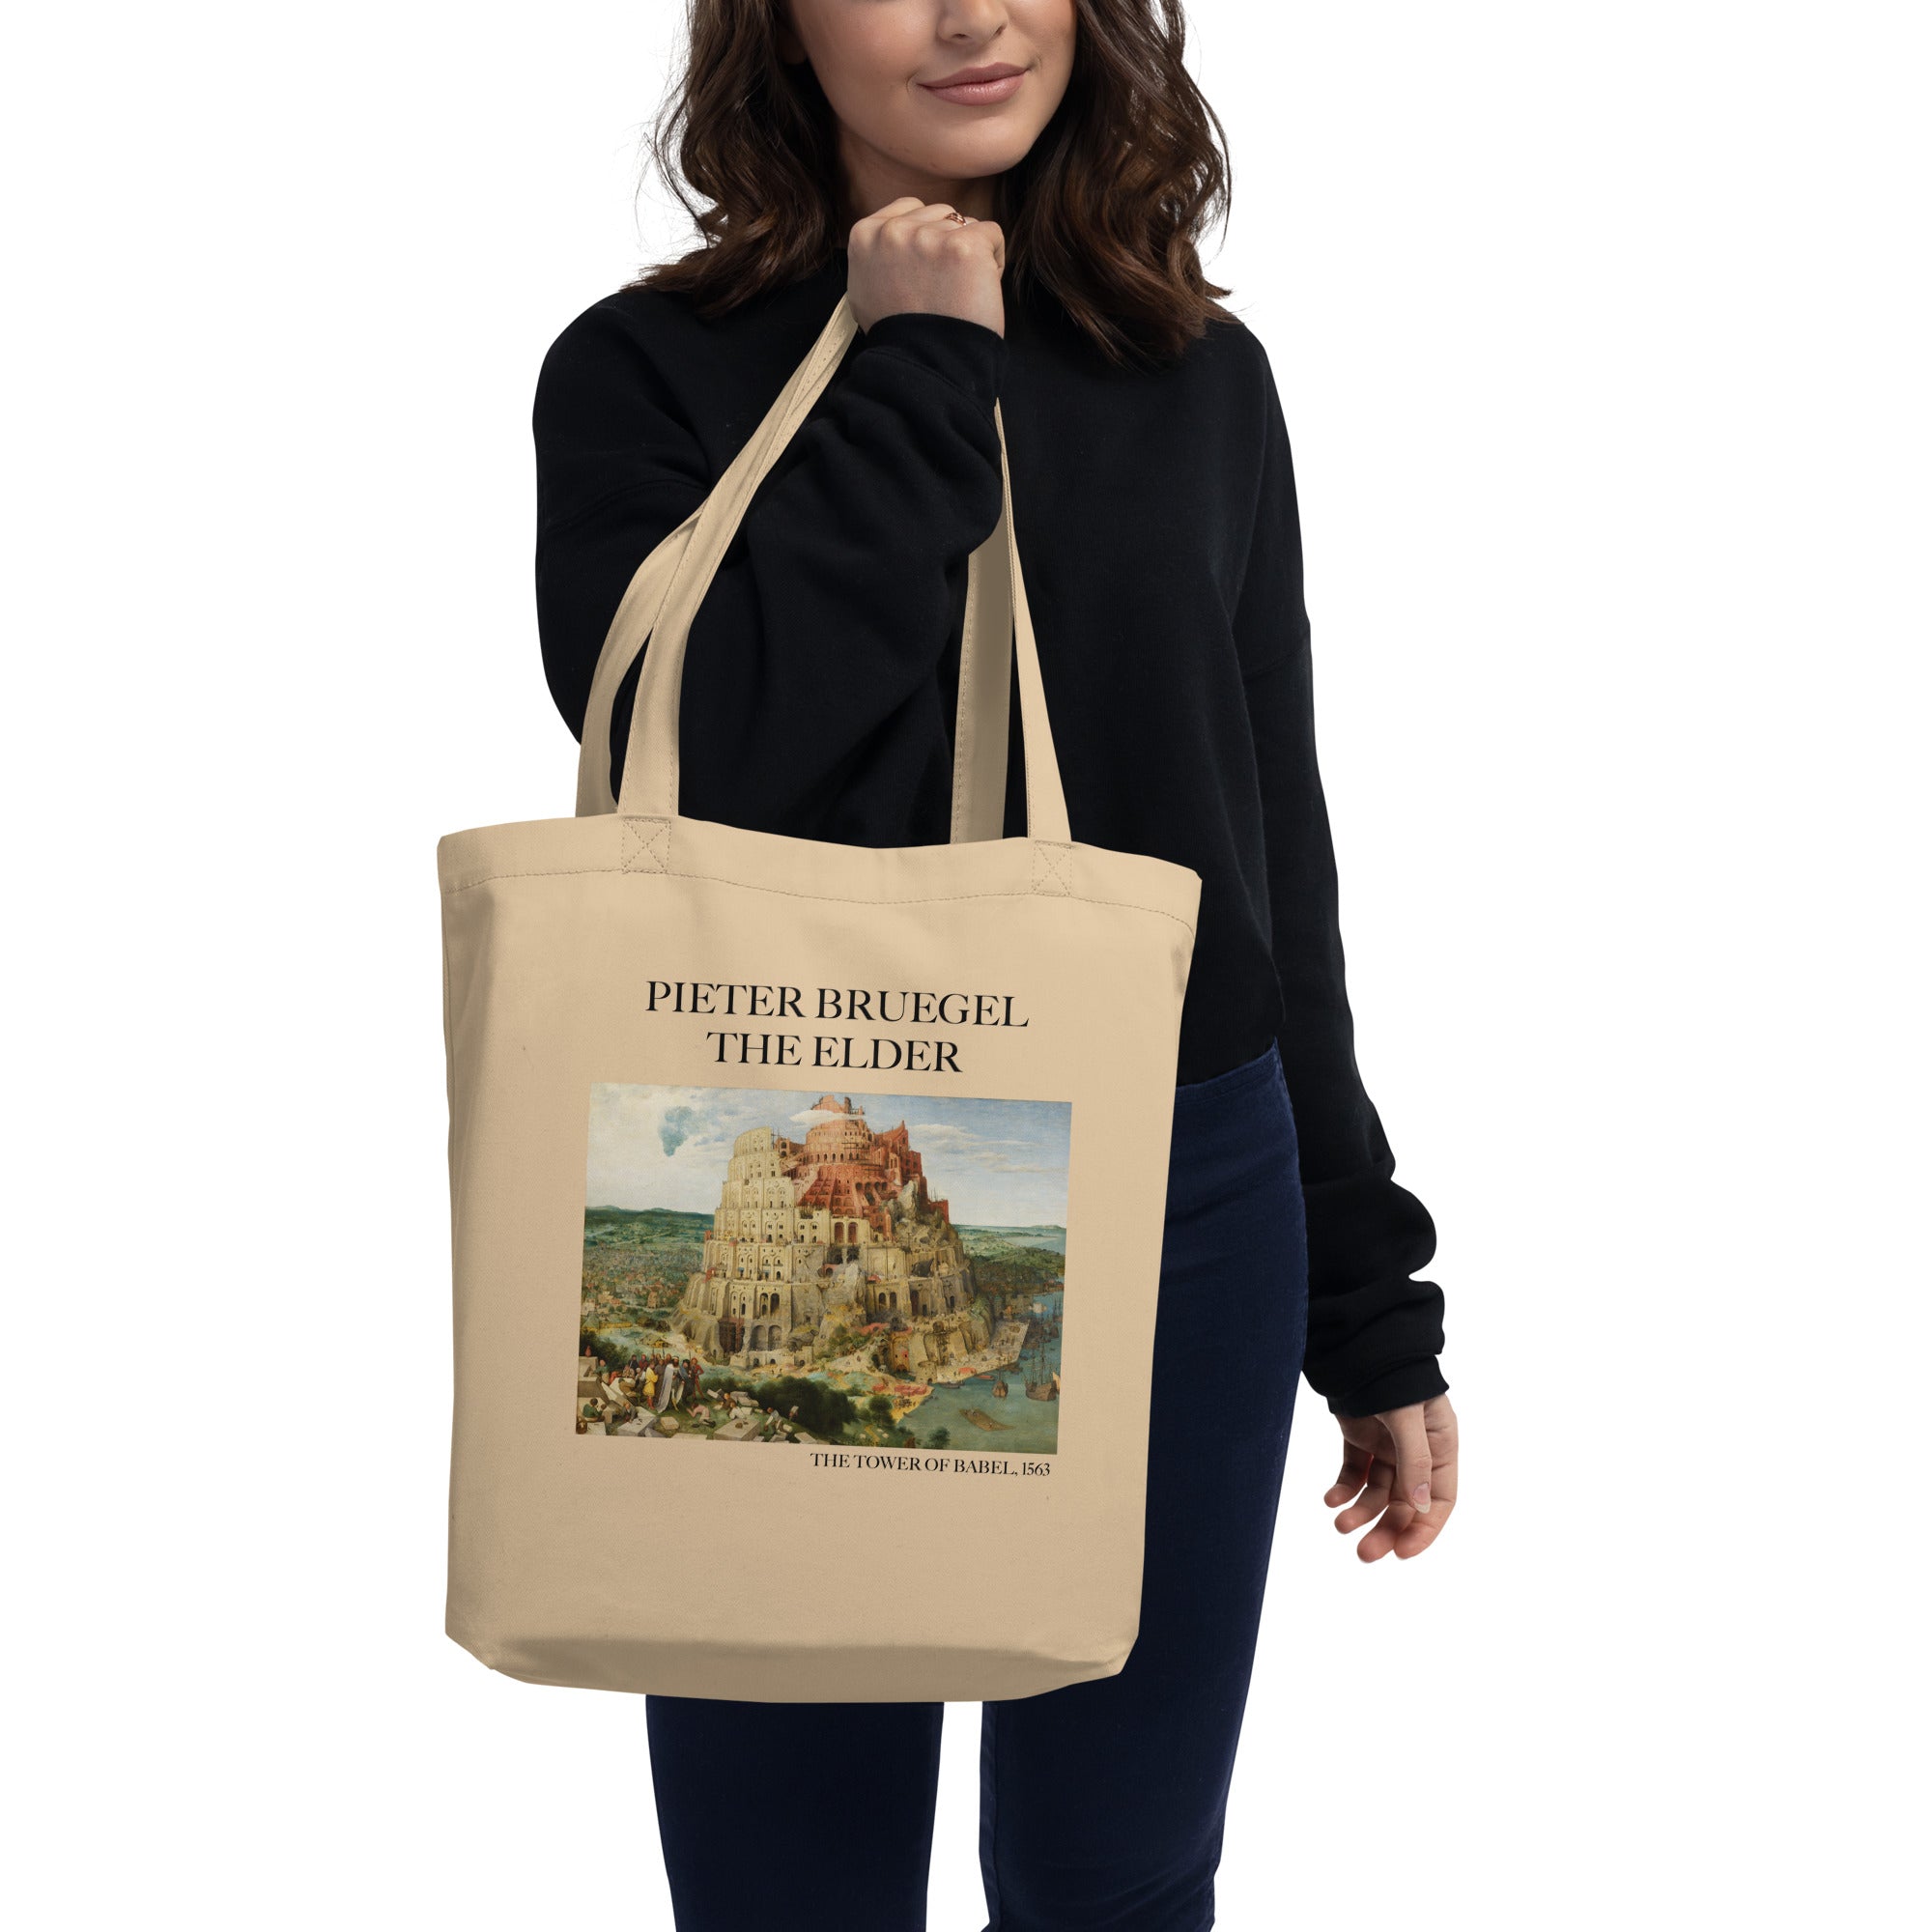 Pieter Bruegel the Elder 'The Tower of Babel' Famous Painting Totebag | Eco Friendly Art Tote Bag